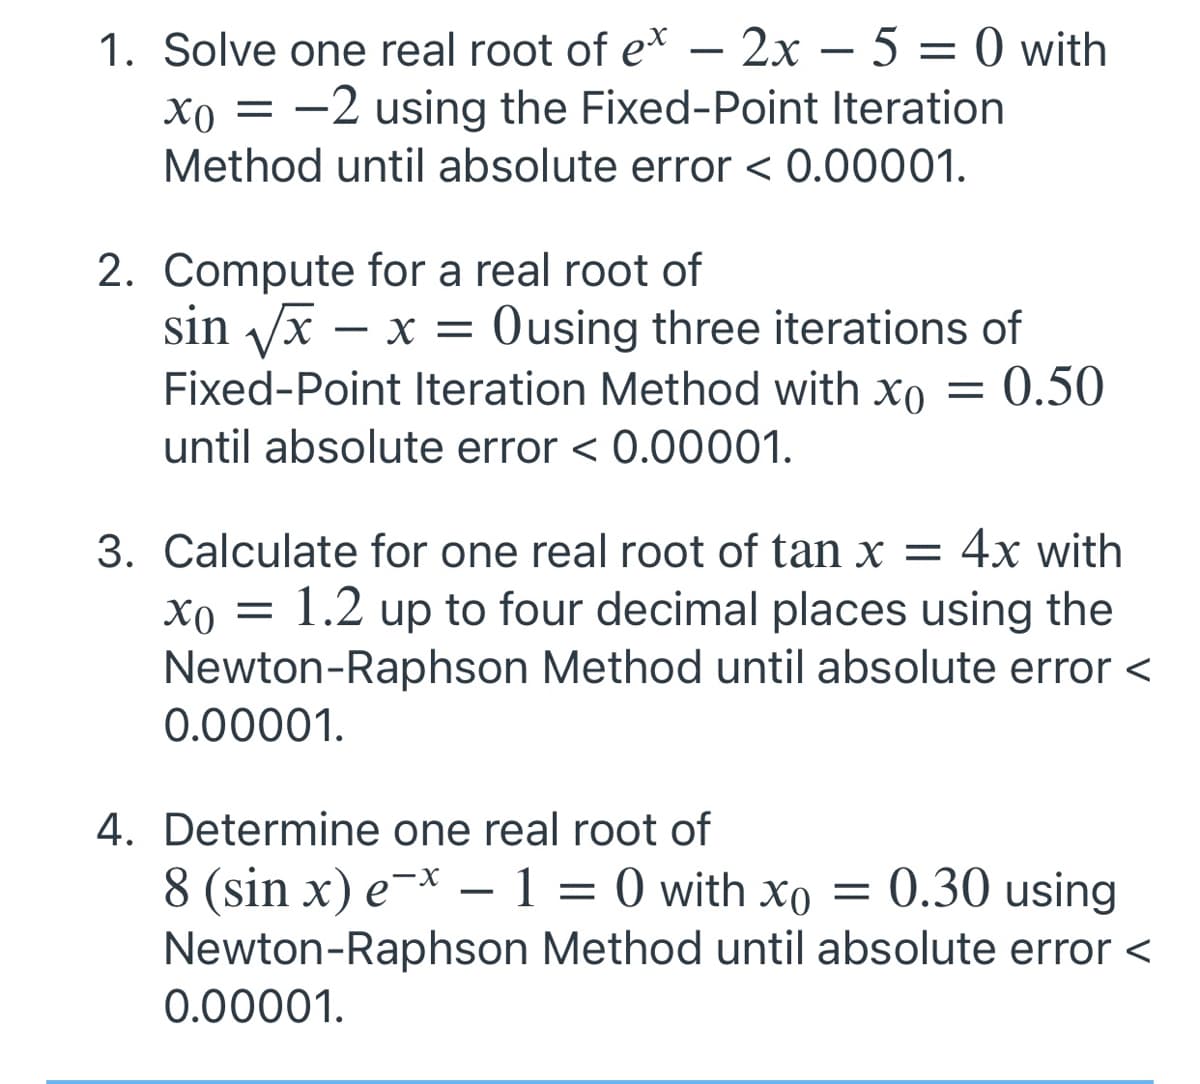 1. Solve one real root of e* – 2x – 5 = 0 with
-
xo = -2 using the Fixed-Point Iteration
Method until absolute error < 0.00001.
2. Compute for a real root of
sin Vx – x = Ousing three iterations of
Fixed-Point Iteration Method with xo = 0.50
until absolute error < 0.00001.
3. Calculate for one real root of tan x = 4x with
1.2 up to four decimal places using the
Newton-Raphson Method until absolute error <
0.00001.
4. Determine one real root of
8 (sin x) e¯* – 1 = 0 with xo = 0.30 using
Newton-Raphson Method until absolute error <
-х —
0.00001.
